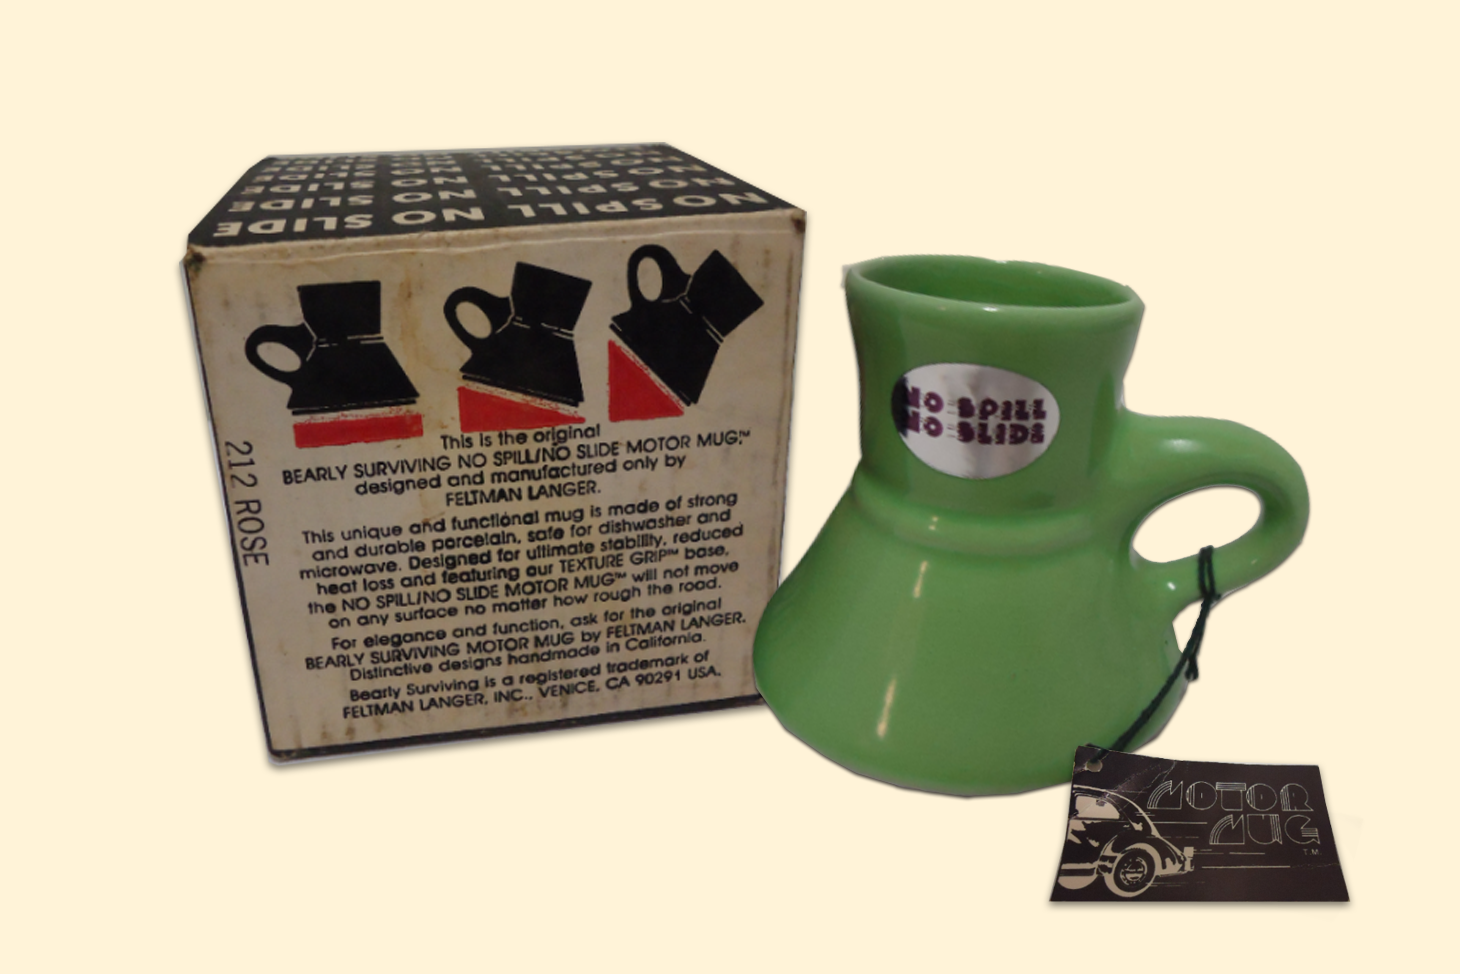 No Spill Non Slip Pottery Travel Coffee Mugs With School -  in